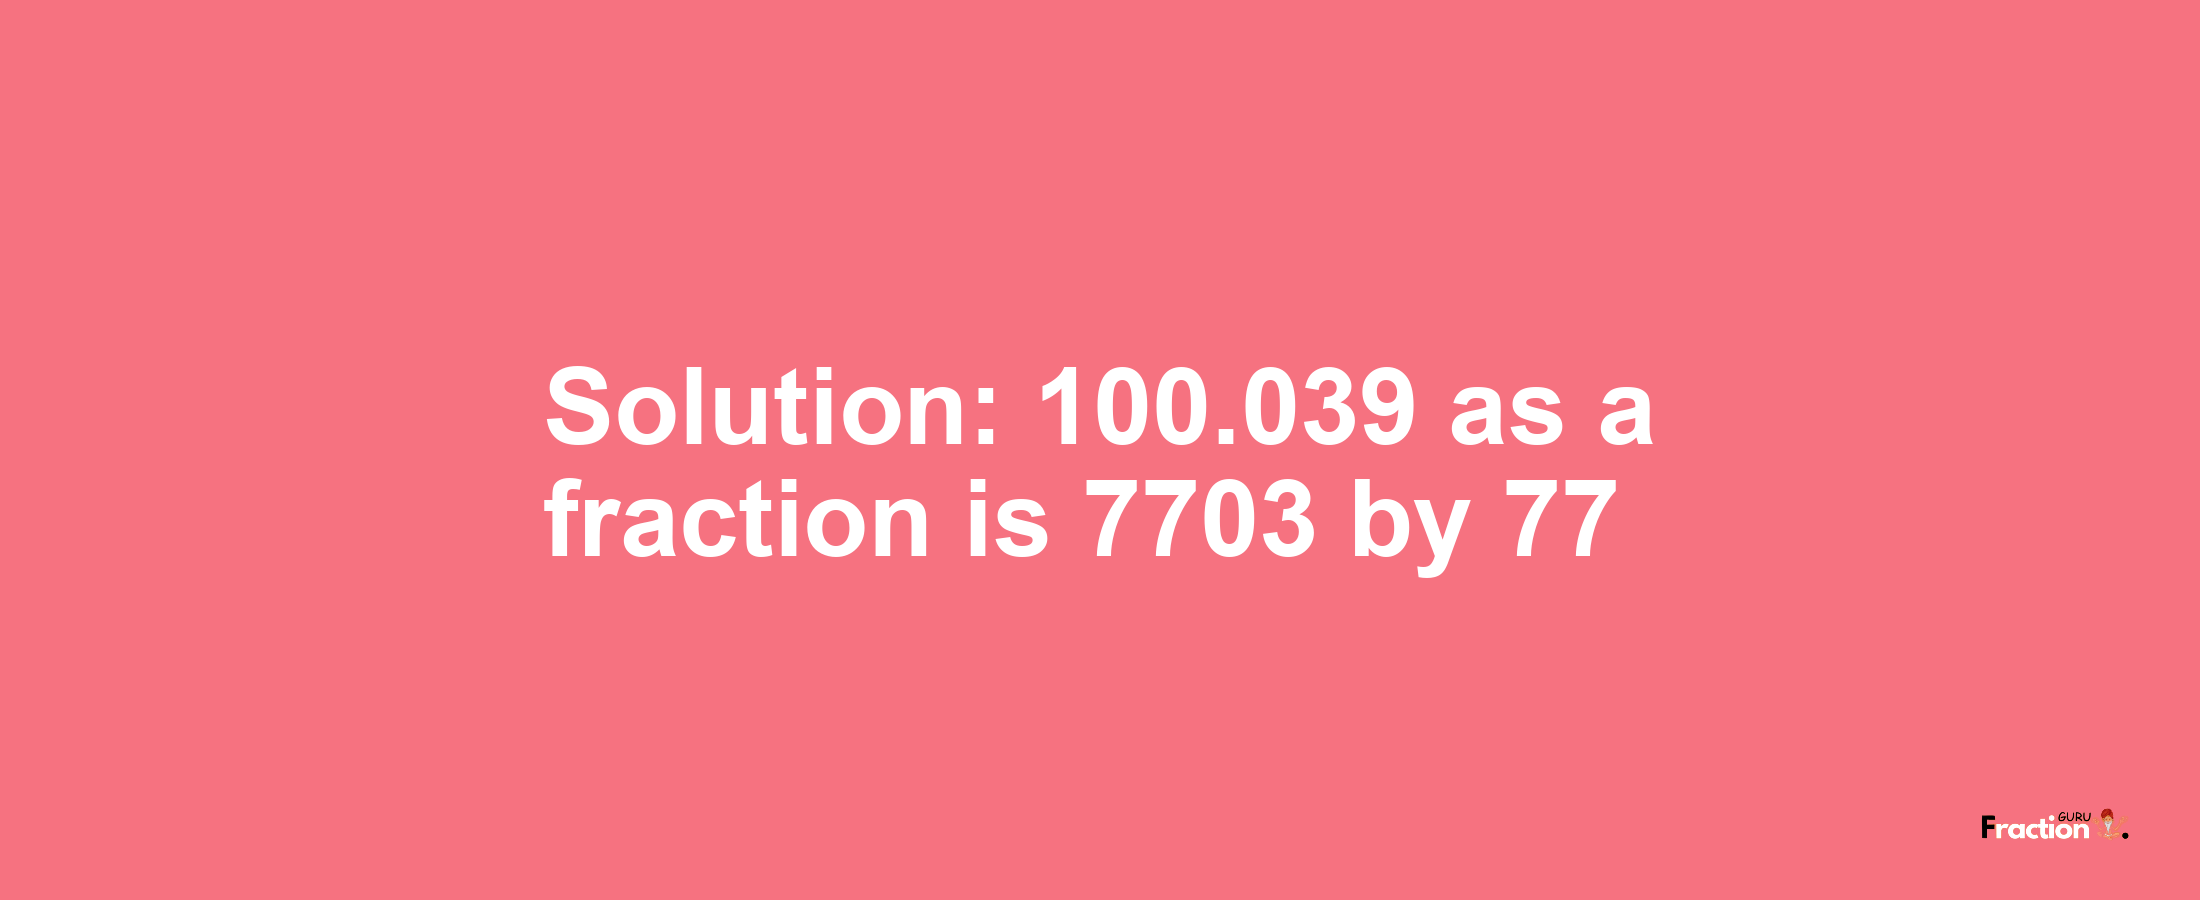 Solution:100.039 as a fraction is 7703/77